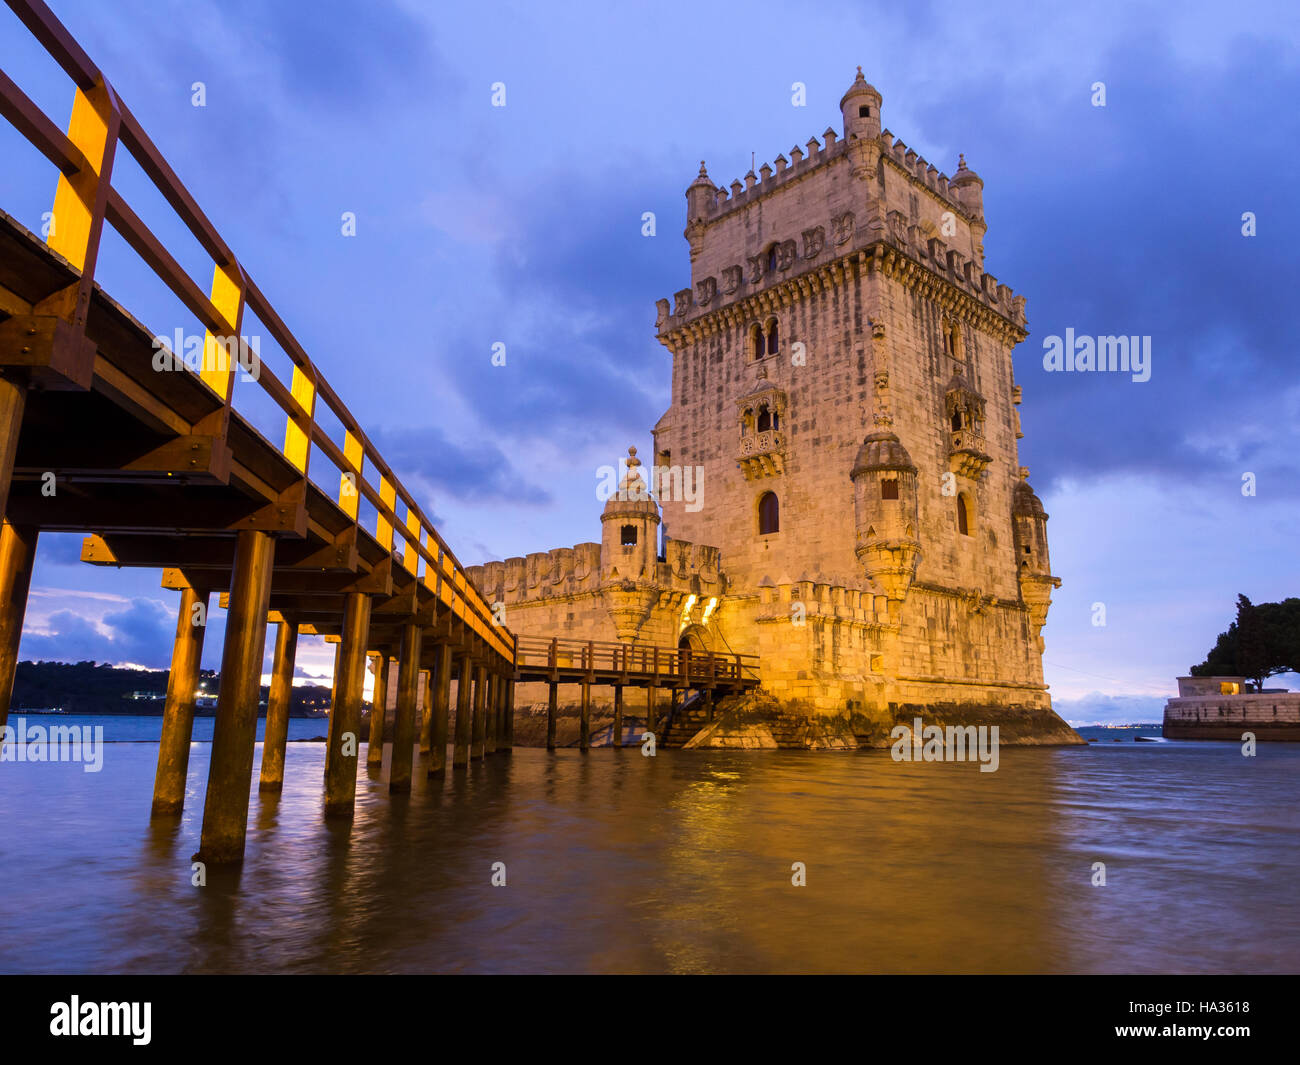 Torre de Belem on the bank of Tagus river in Lisbon, Portugal, at night. Stock Photo